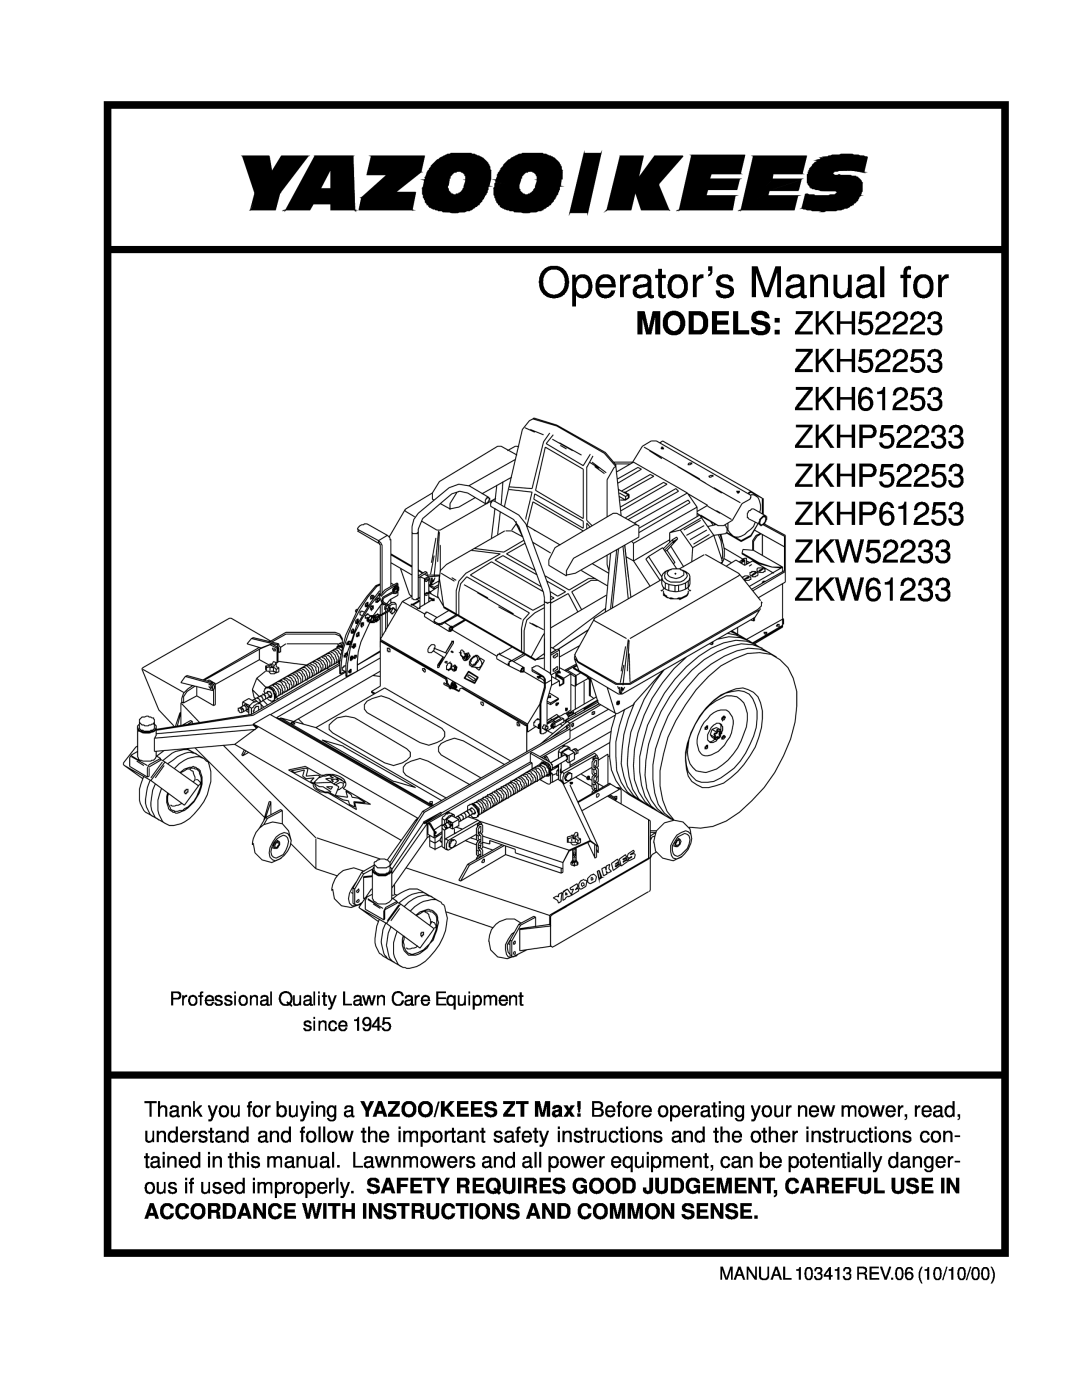 Yazoo/Kees ZKH61253, ZKHP52233 important safety instructions Operator’s Manual for, MODELS ZKH52223, ZKW52233 ZKW61233 